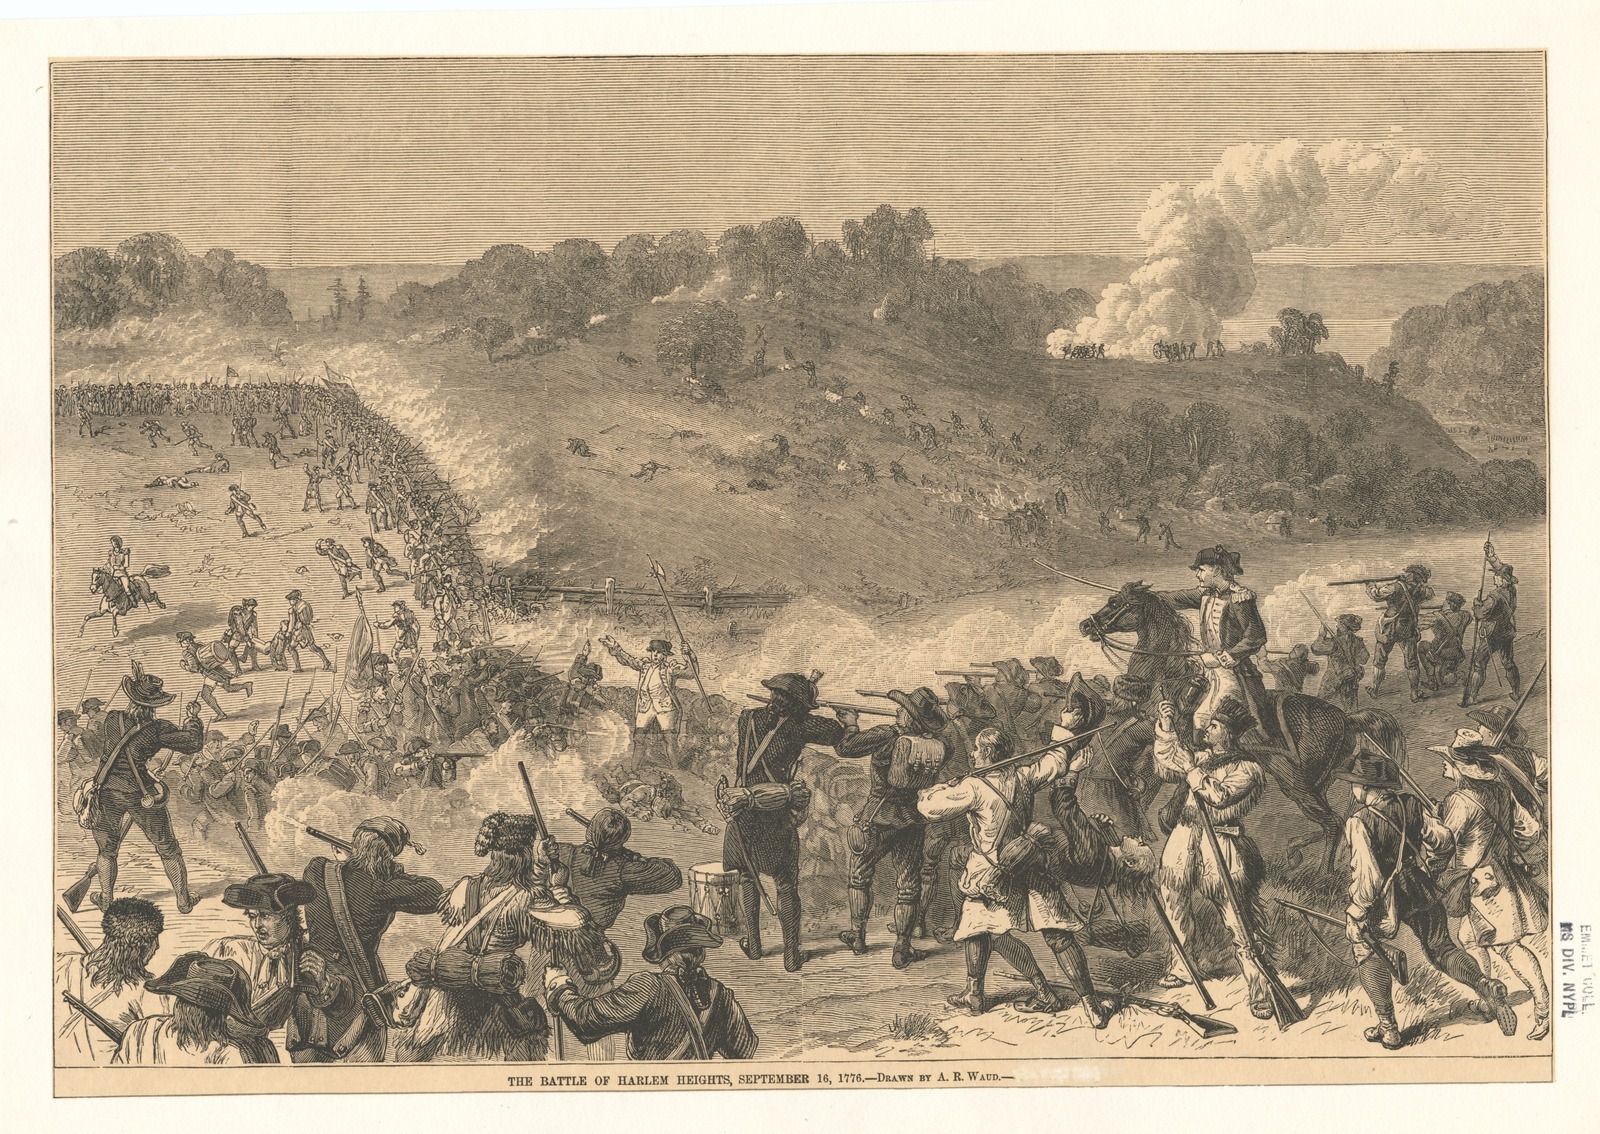 Black and white drawing of men engaged in battle with muskets. A man on a horse is in the lower right corner. Hills and smoke, with smaller figures, are featured in the background.